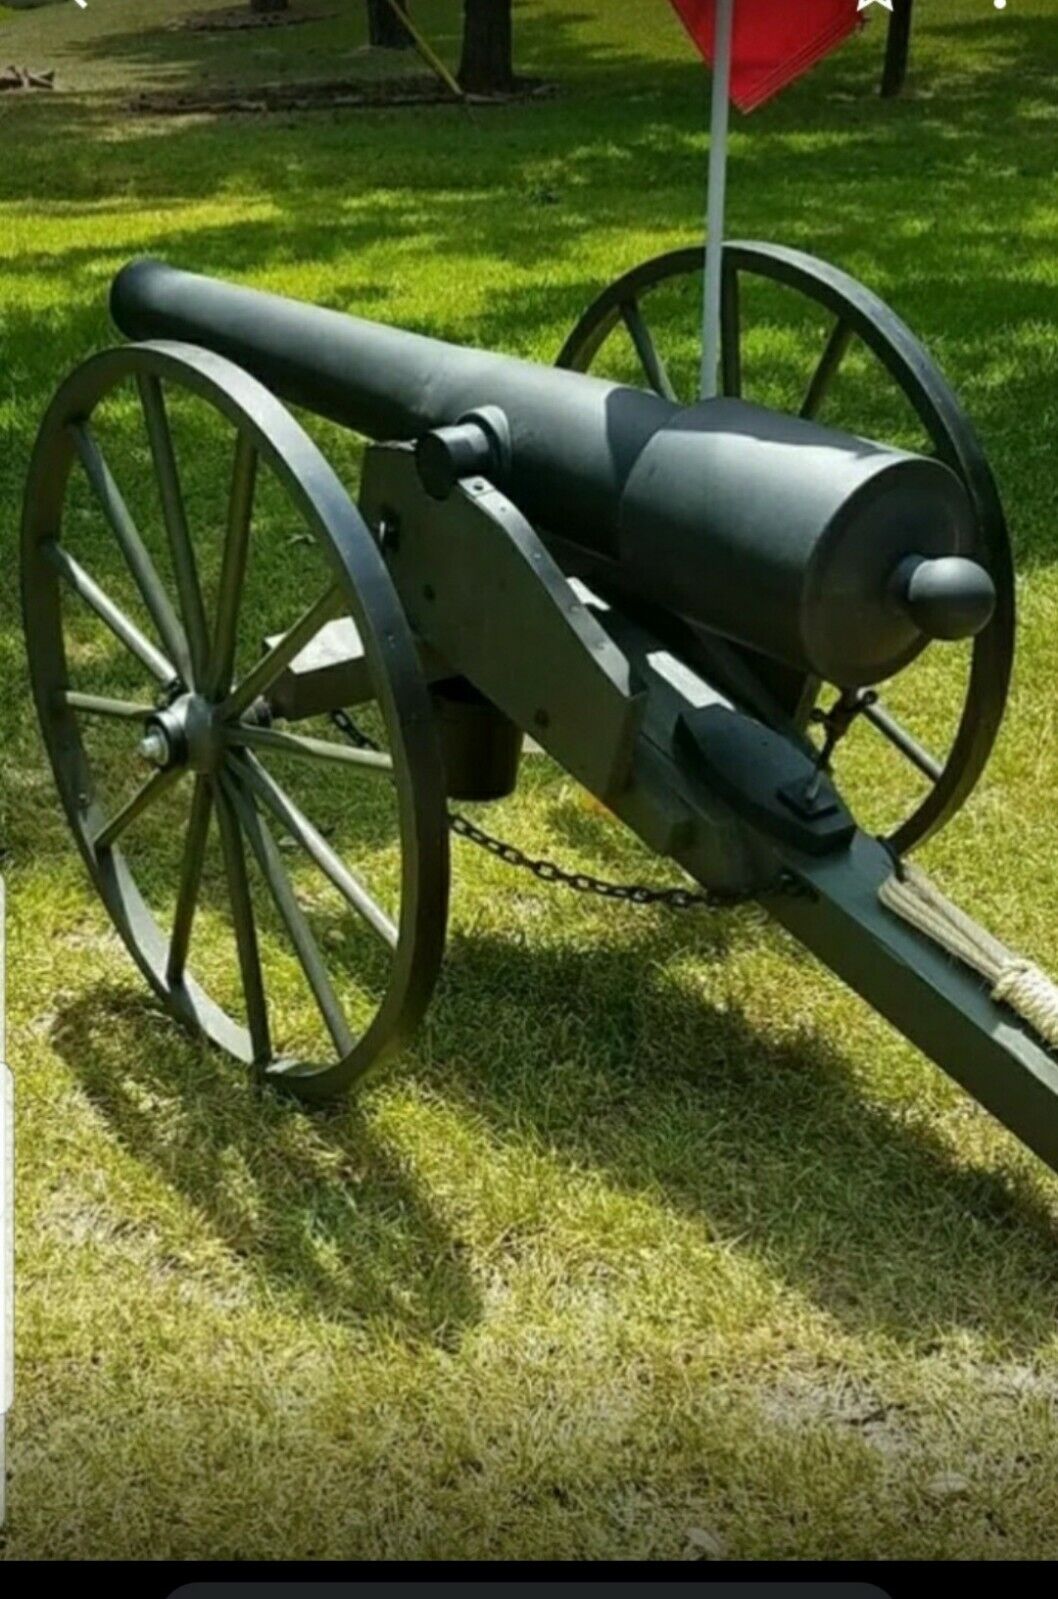 Civil War Style Cannon, , Full size replica, 2.9 inch Parrot Rifle.